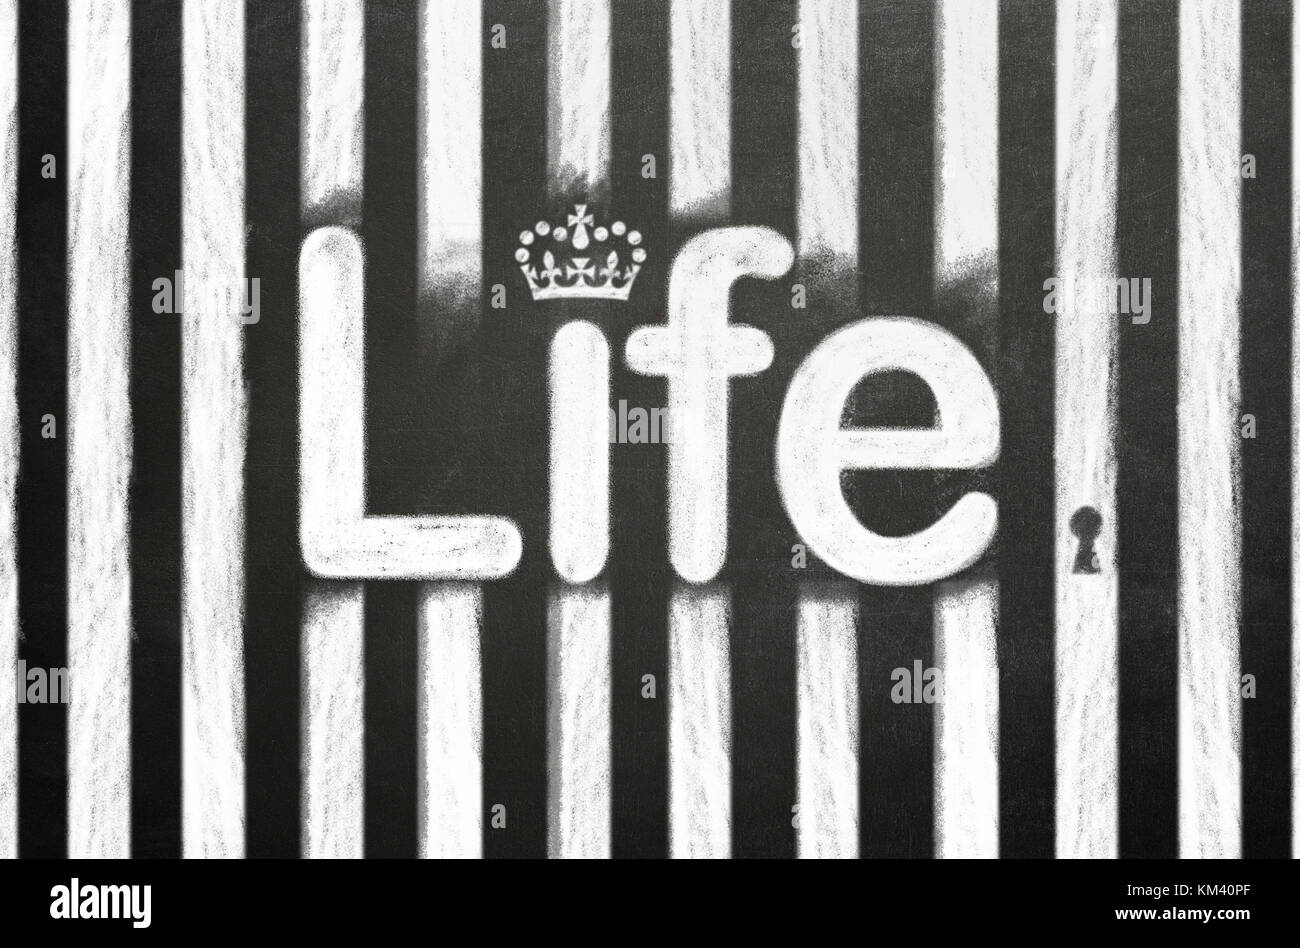 PRISON Life Sentence CONCEPT. The word LFE with cell bars drawn in chalk on a blackboard. Stock Photo